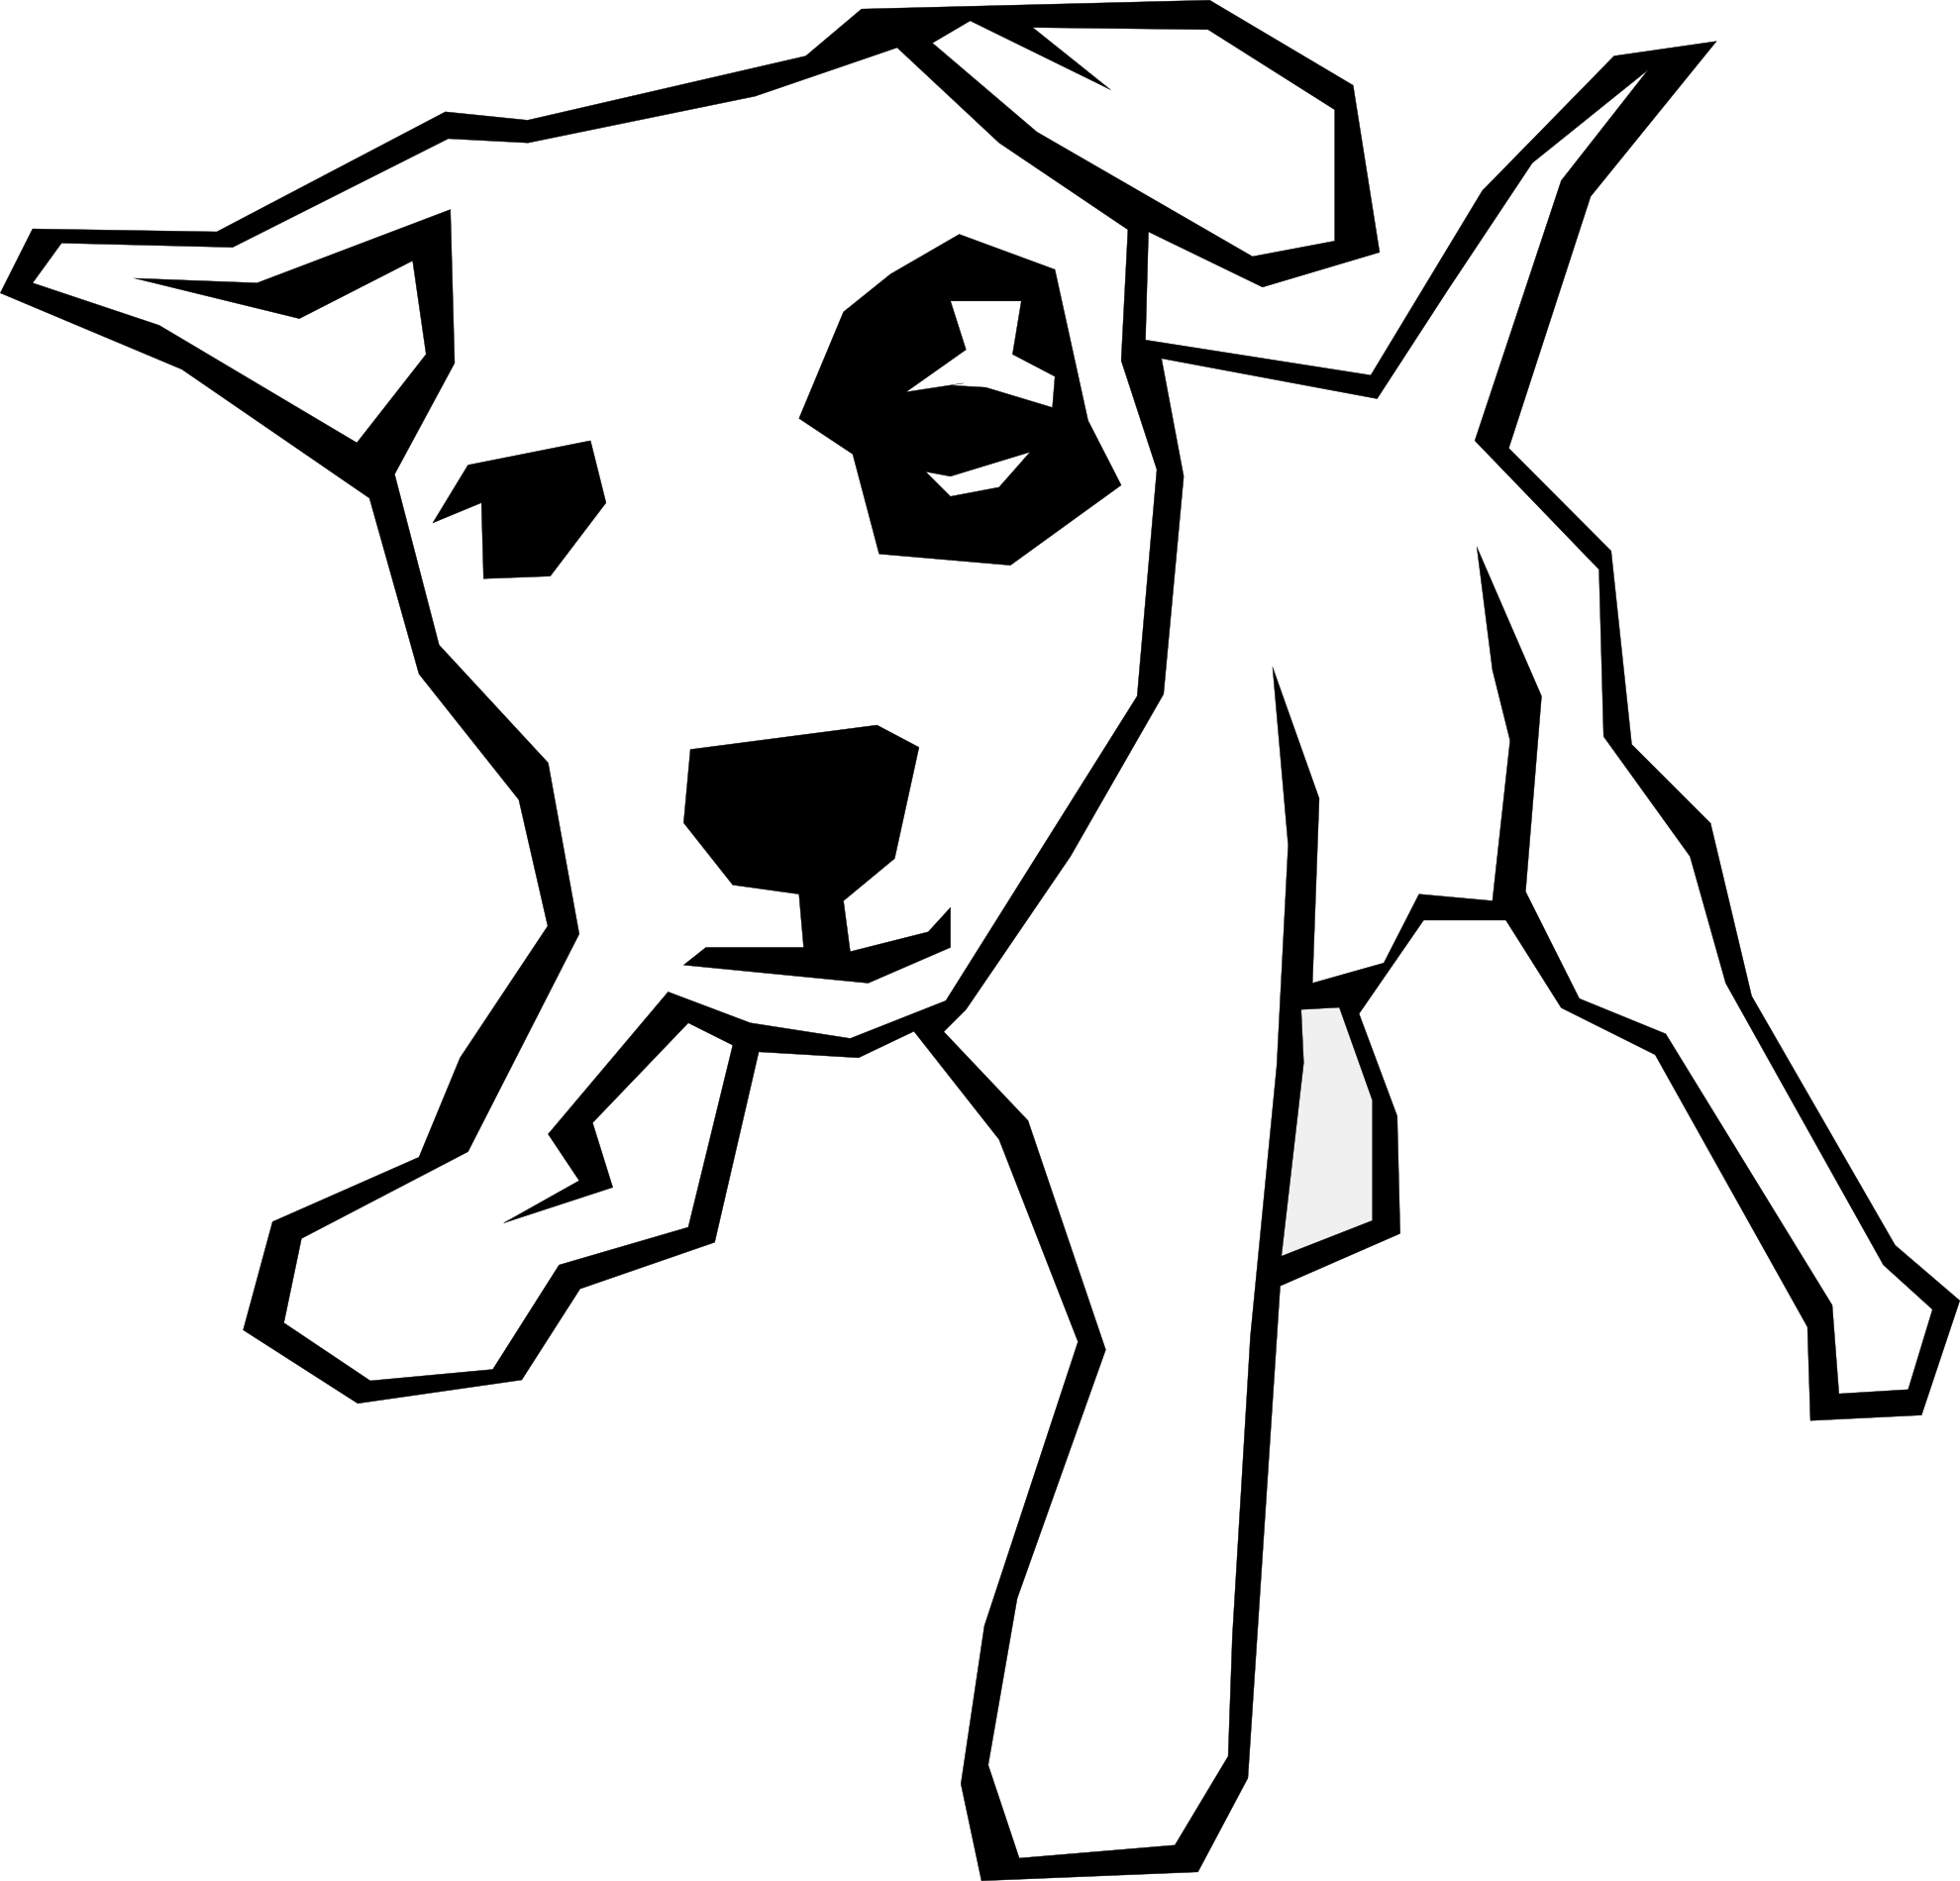 Dog Face Clip Art Black And White | Clipart Panda - Free Clipart ...